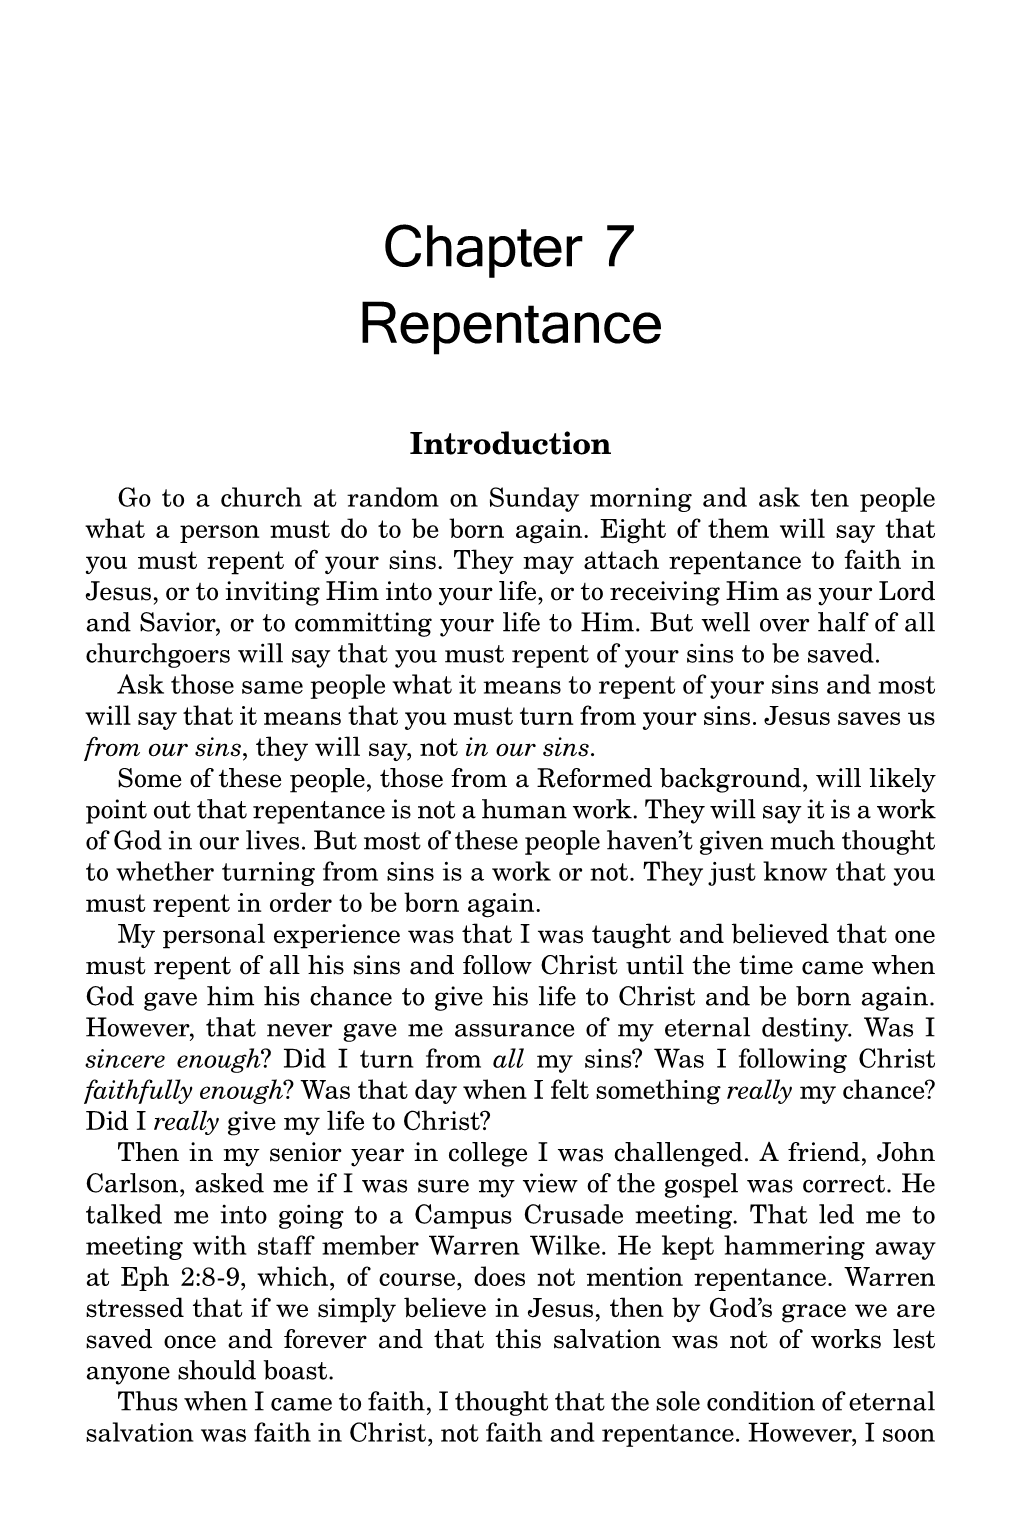 Chapter 7 Repentance